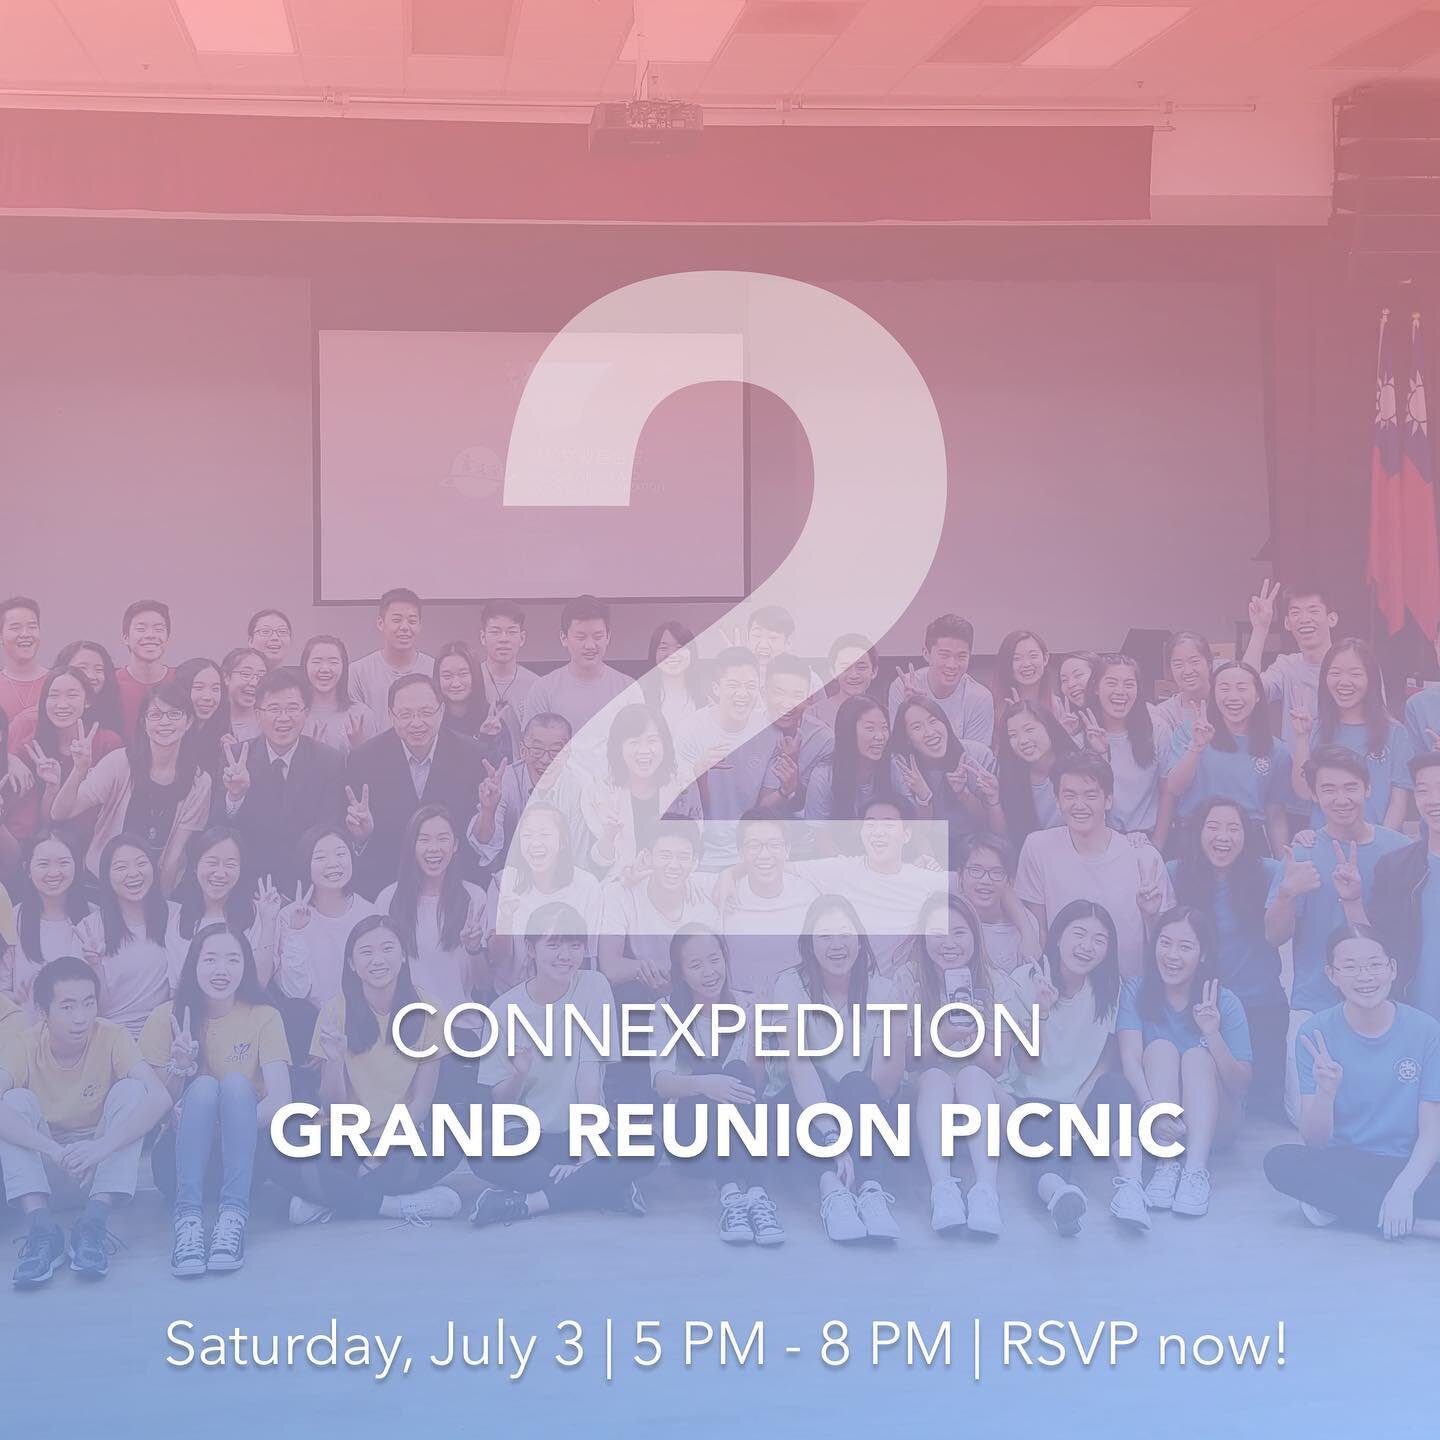 LAST DAY TO RSVP*! There&rsquo;ll be free food, refreshments, games, and (hopefully) a pretty sunset view &mdash; what&rsquo;s stopping you from going? 🤭

‼️ Make sure to invite your teammates to have the best time :)

*Send an email to connexpediti